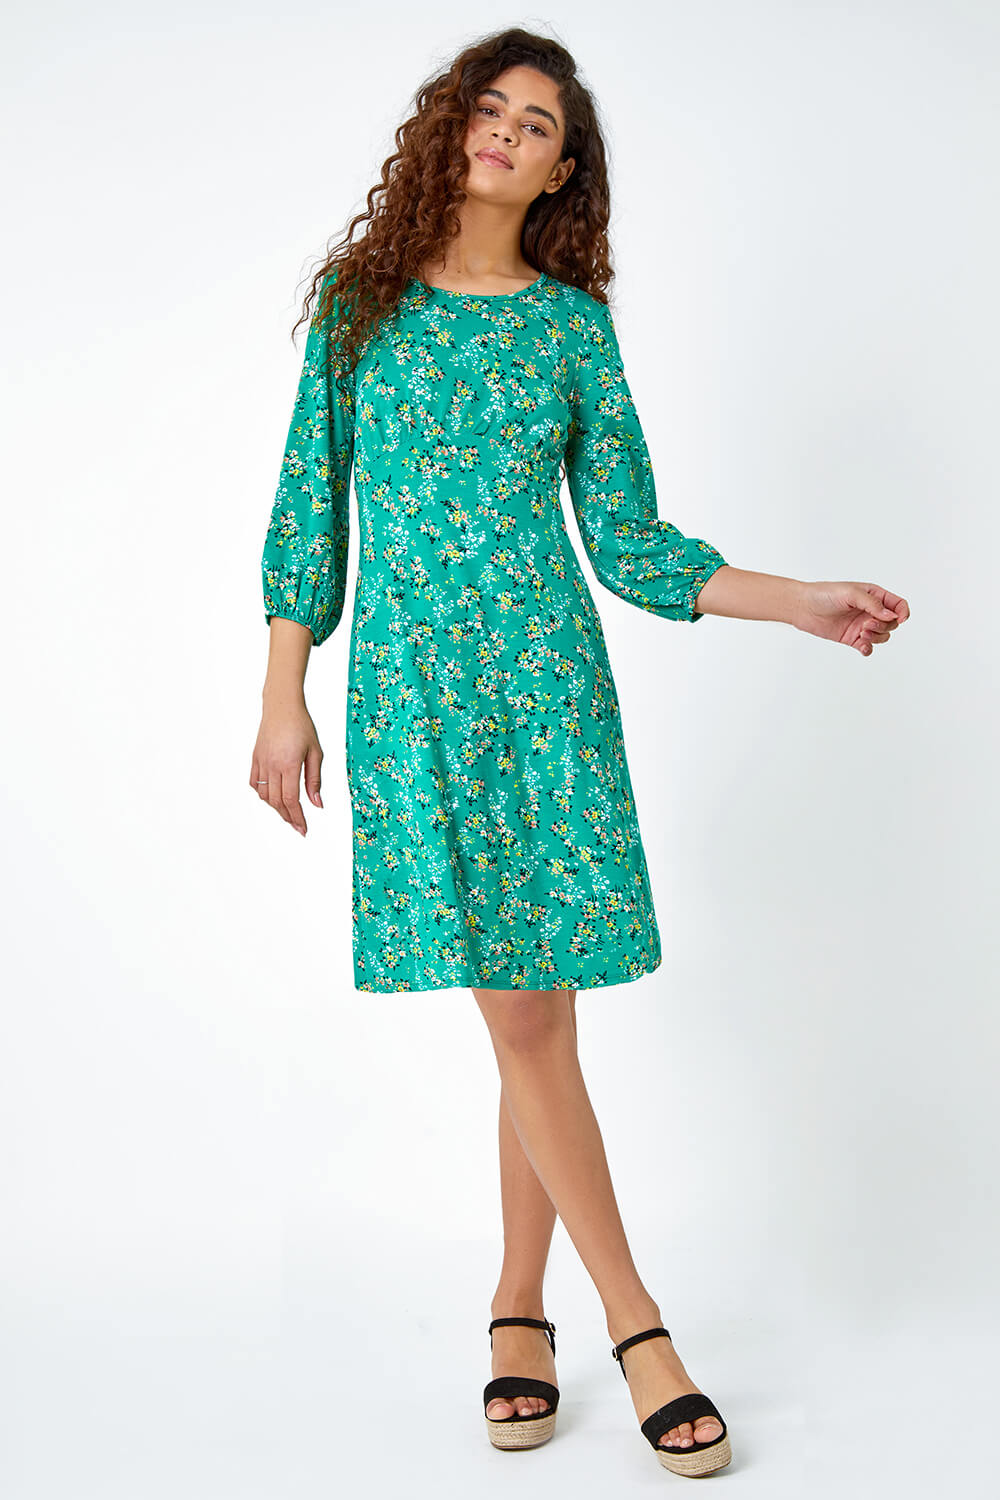 Green Ditsy Floral Print Stretch Jersey Dress, Image 2 of 5